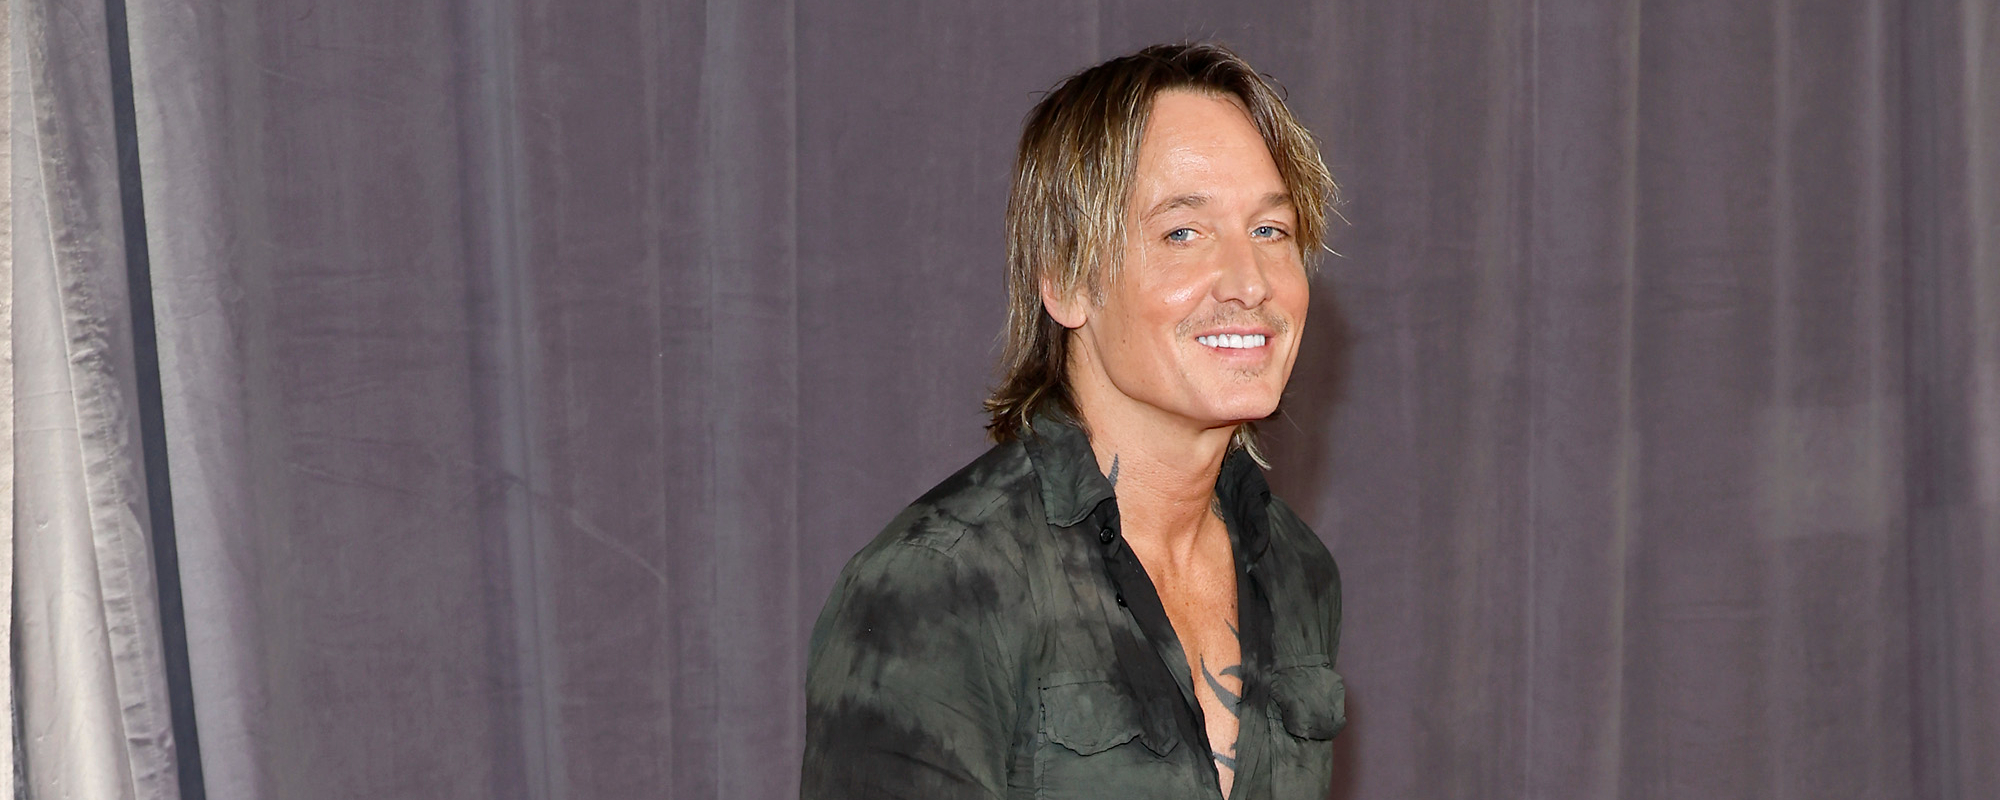 Keith Urban Shares His Worst Day as a Country Singer: “It Was So Embarrassing”